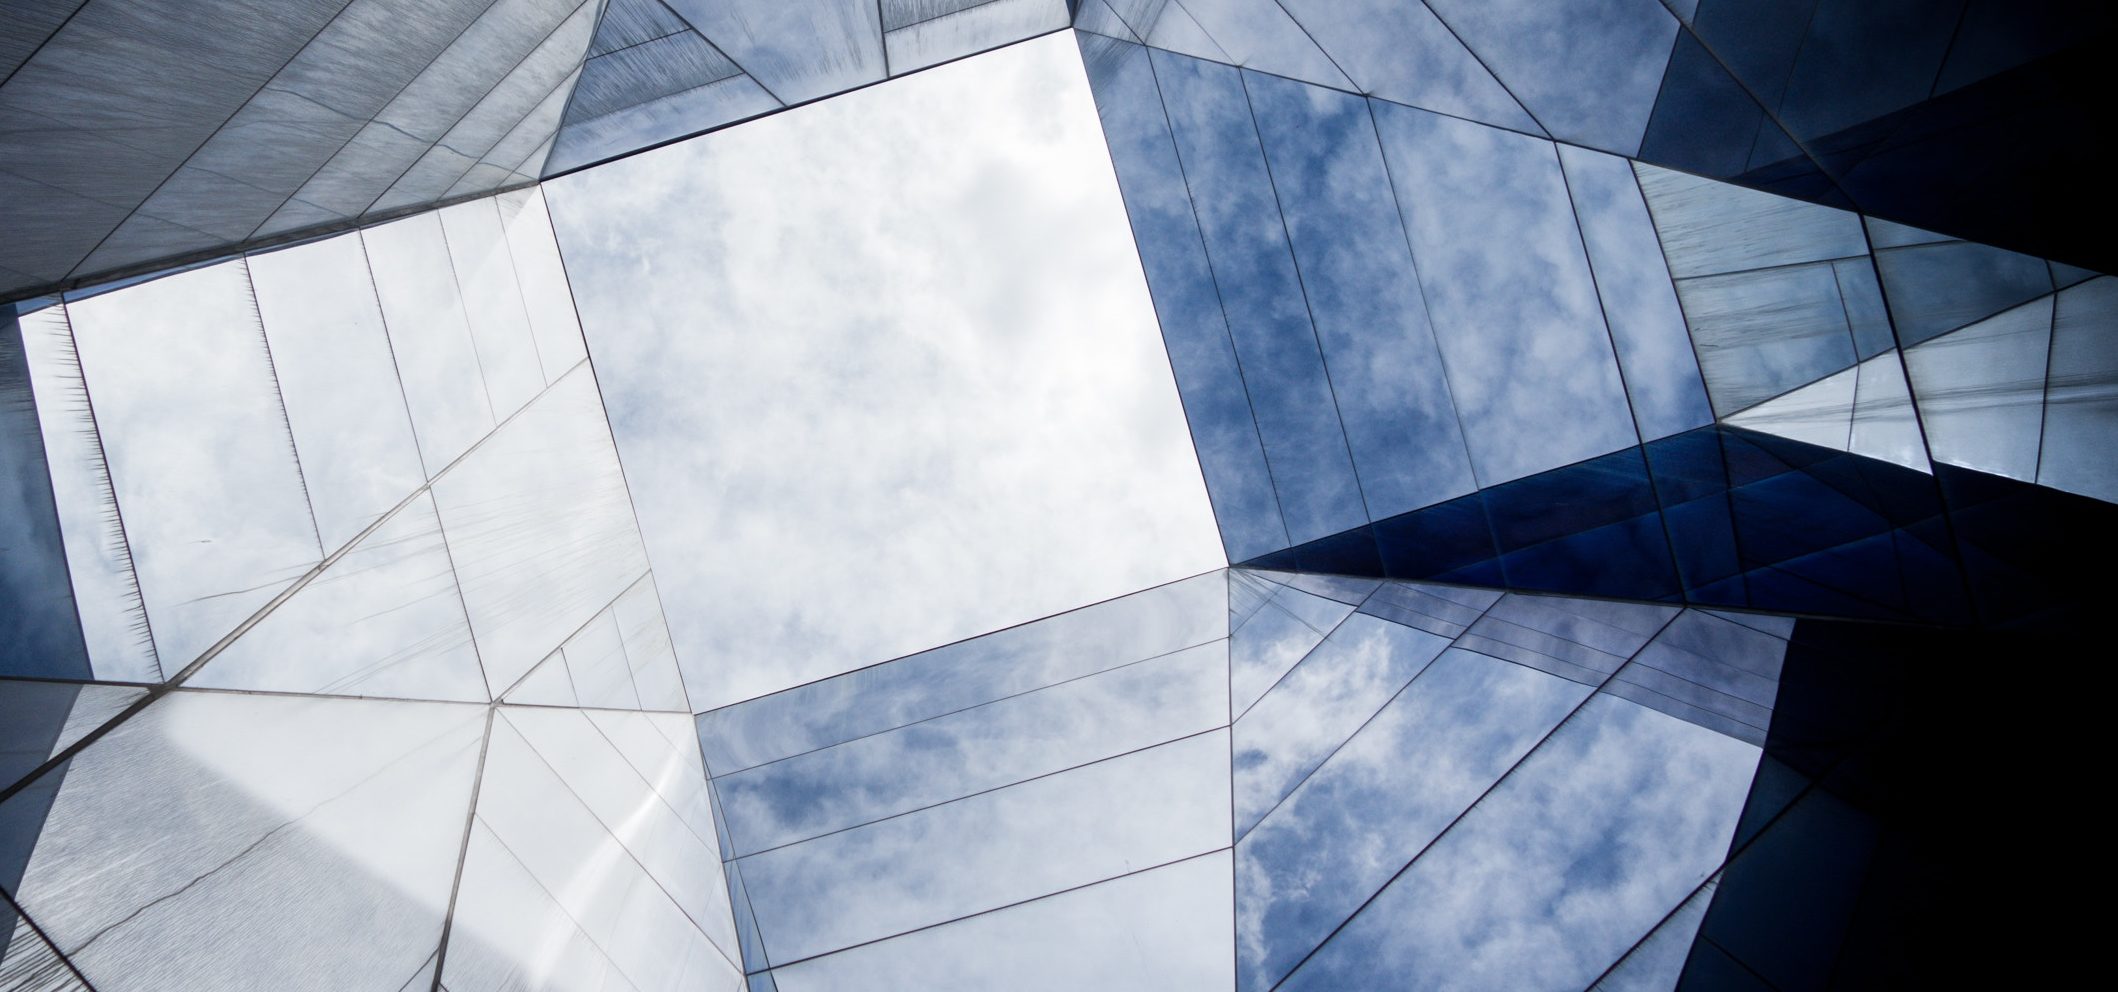 Architectural photo of angular glass planes against a cloudy blue sky